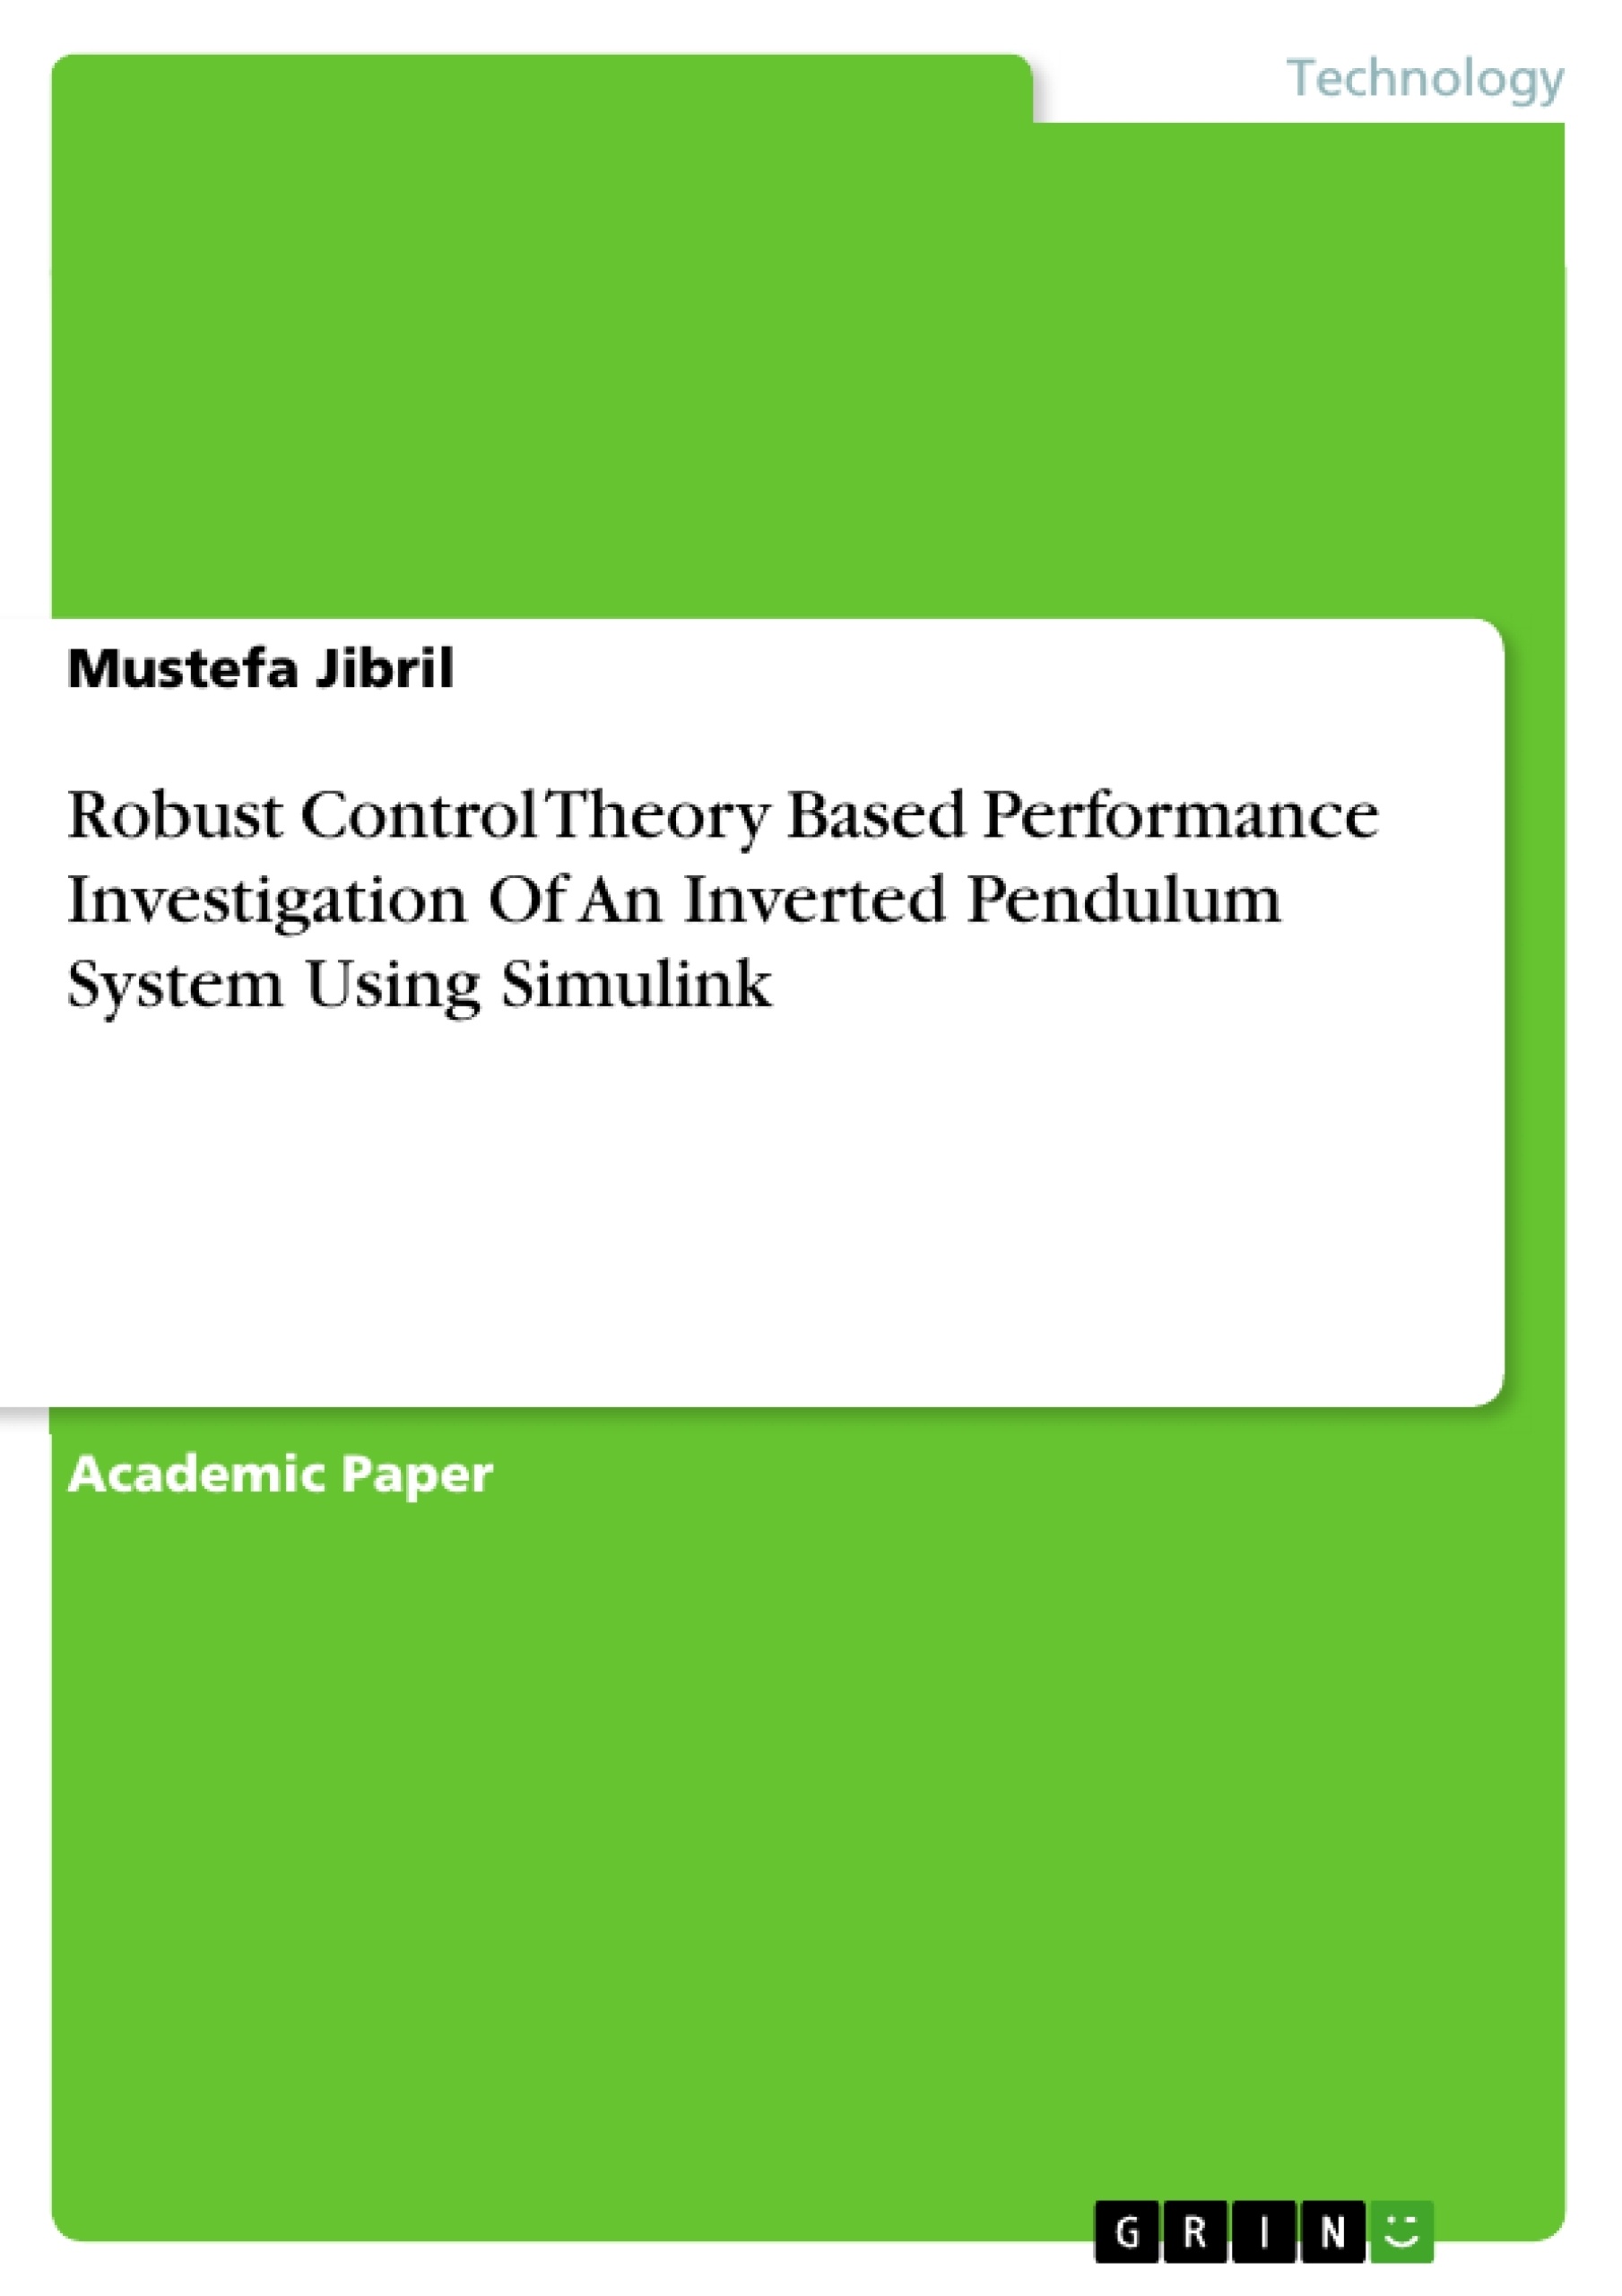 Title: Robust Control Theory Based Performance Investigation Of An Inverted Pendulum System Using Simulink